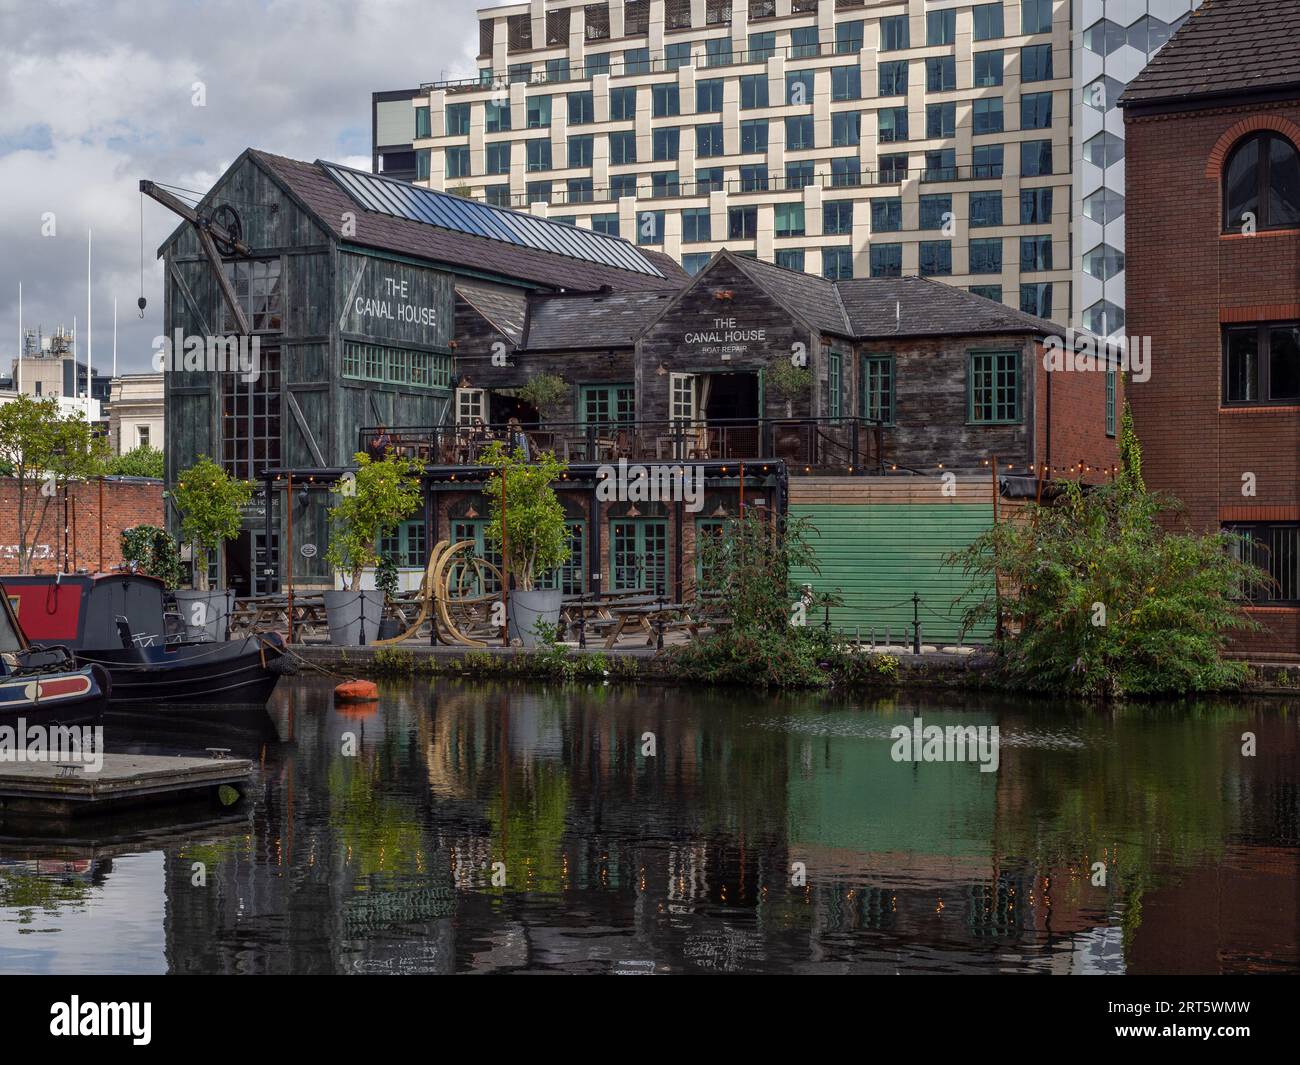 The Canal House pub and restaurant, Gas Street Basin, Birmingham, UK; built in a style sympathetic to the Old Wharf Terminus previously there. Stock Photo